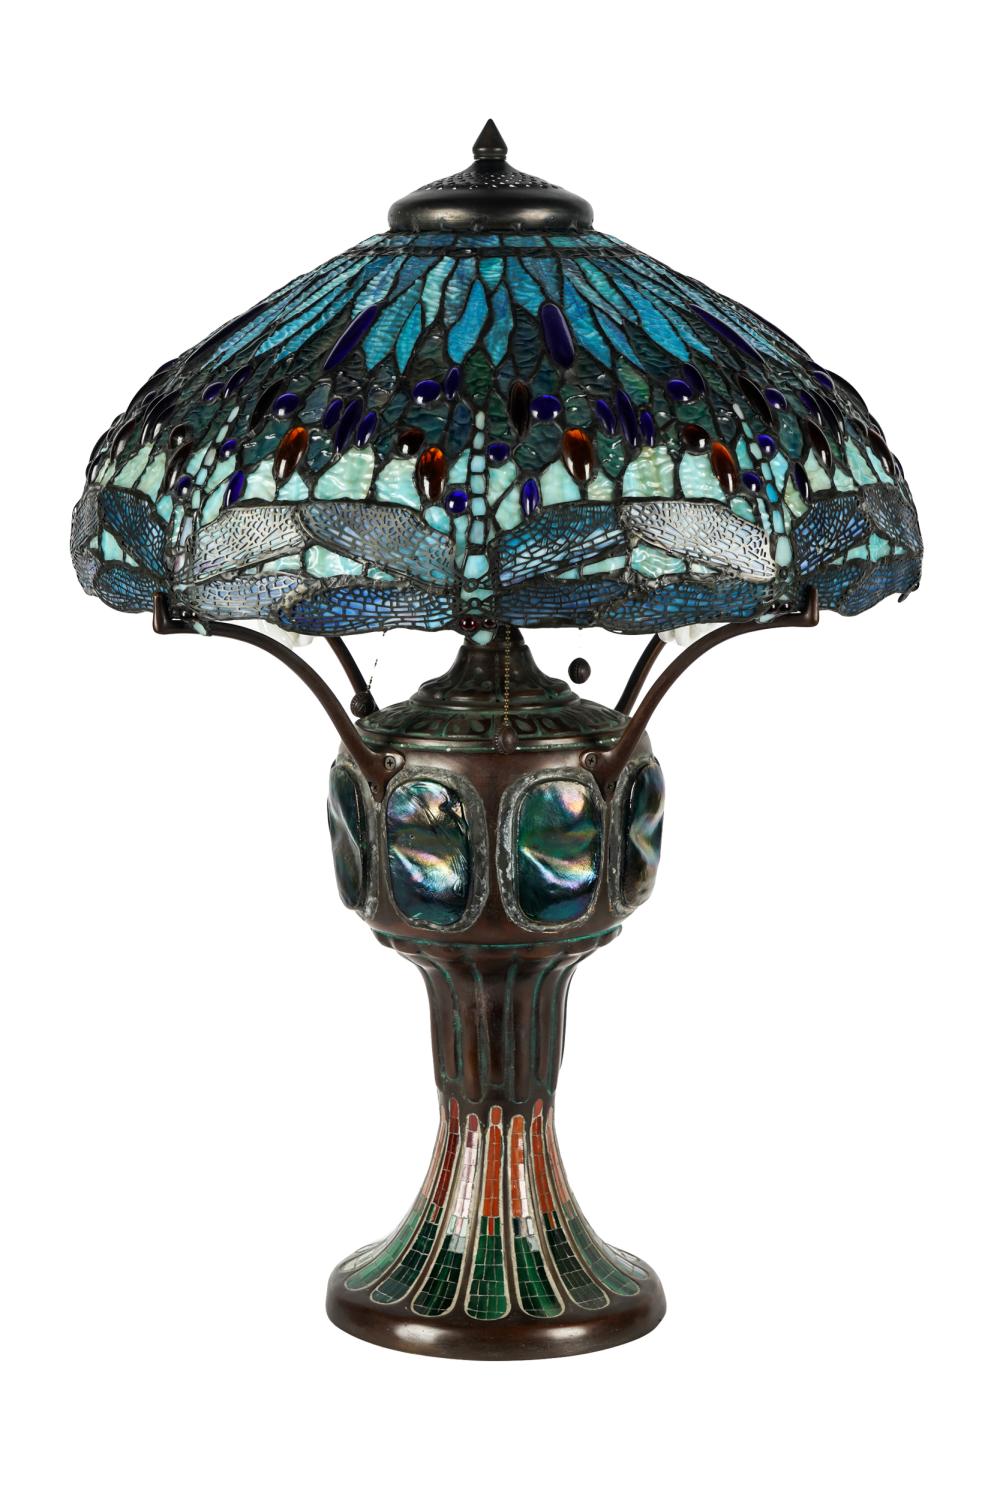 DALE TIFFANY STYLE DRAGONFLY TABLE 3276ab